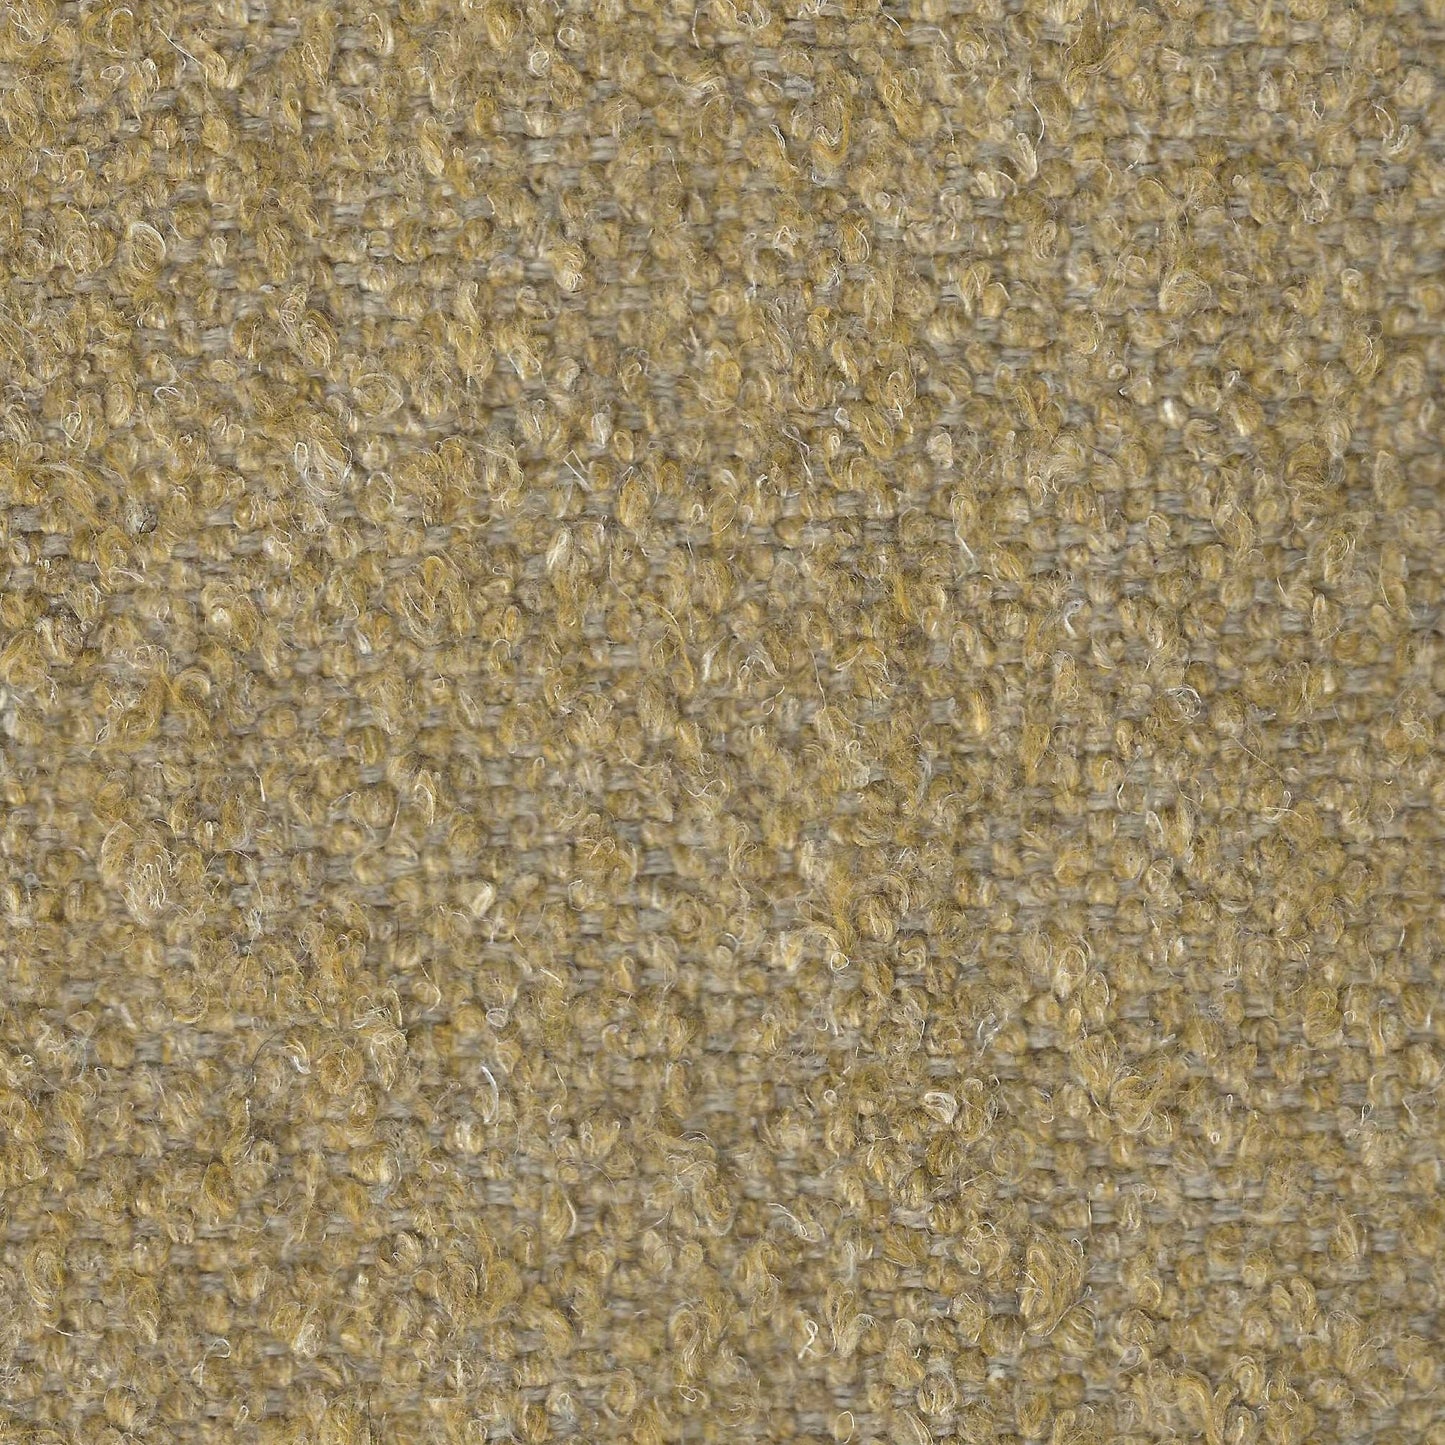 #313 GOLD AND BEIGE BERBER